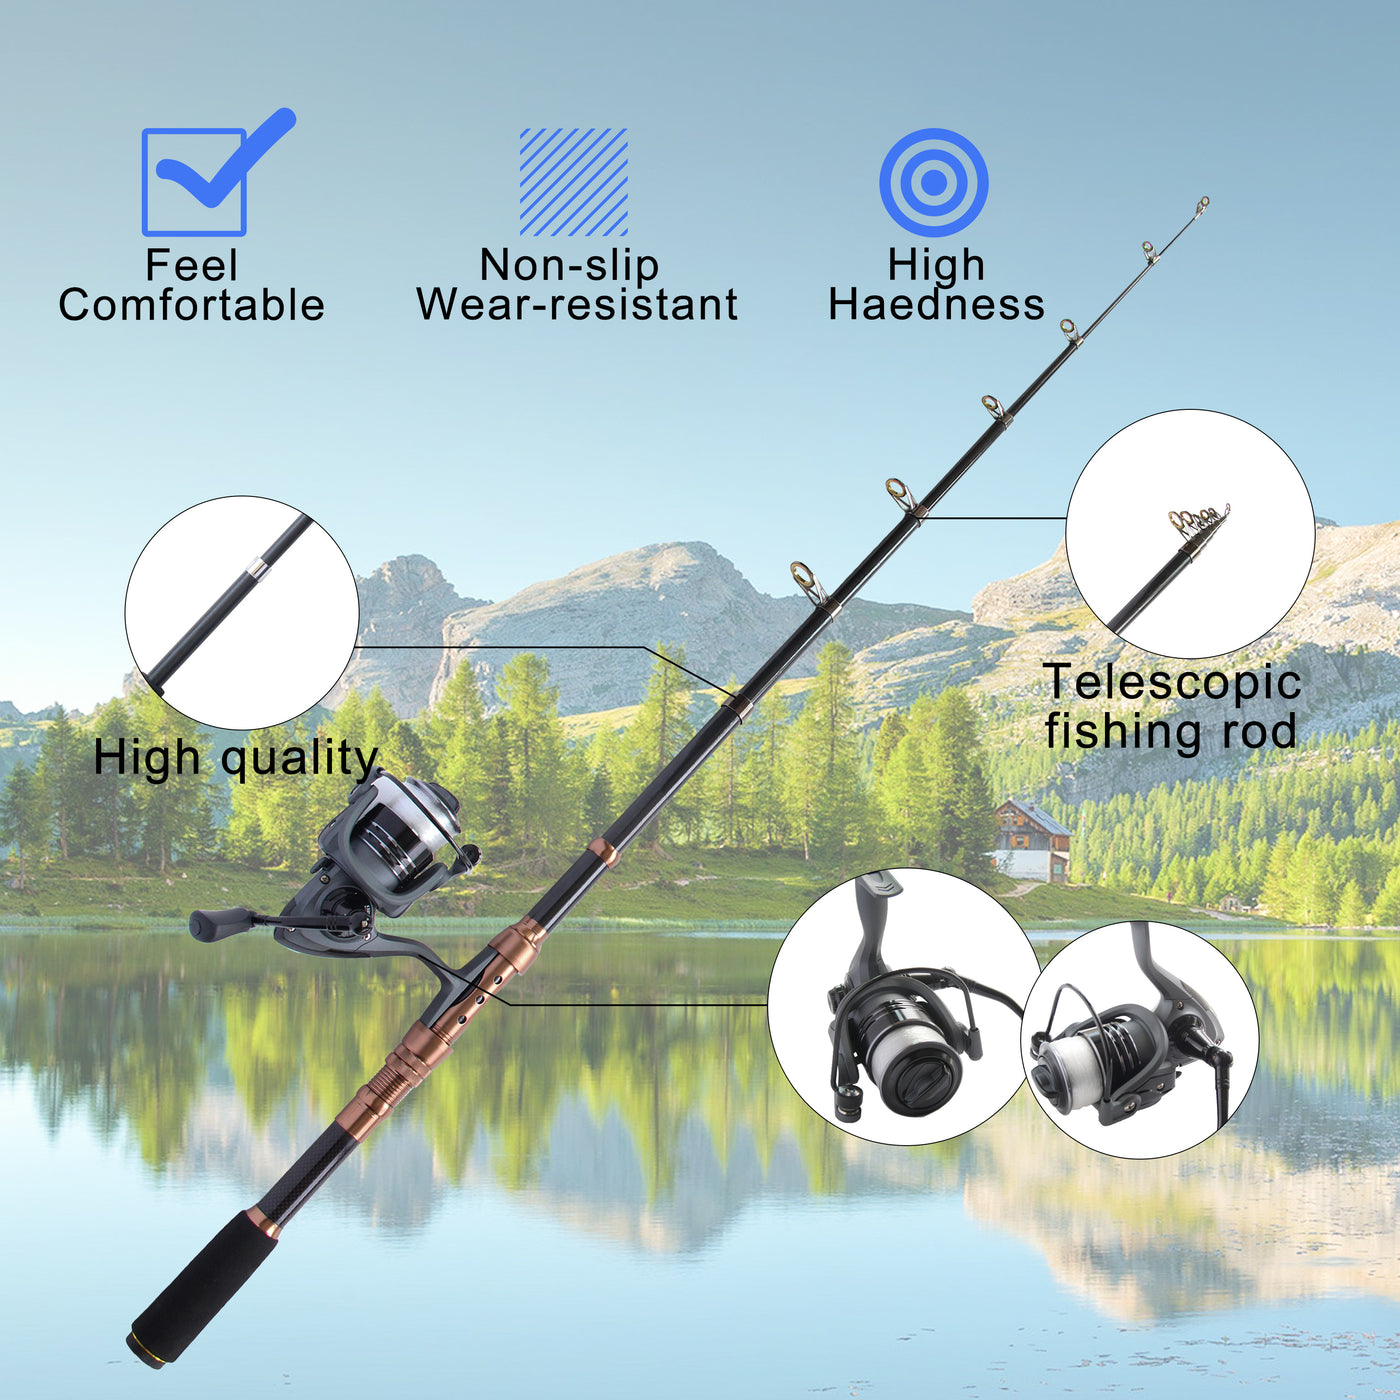 Telescopic Fishing Rod | Reel Combos Full Kit Fishing Accessories | Fishing  Gear Set | Suitable for Beginners Adults | runwave.cn